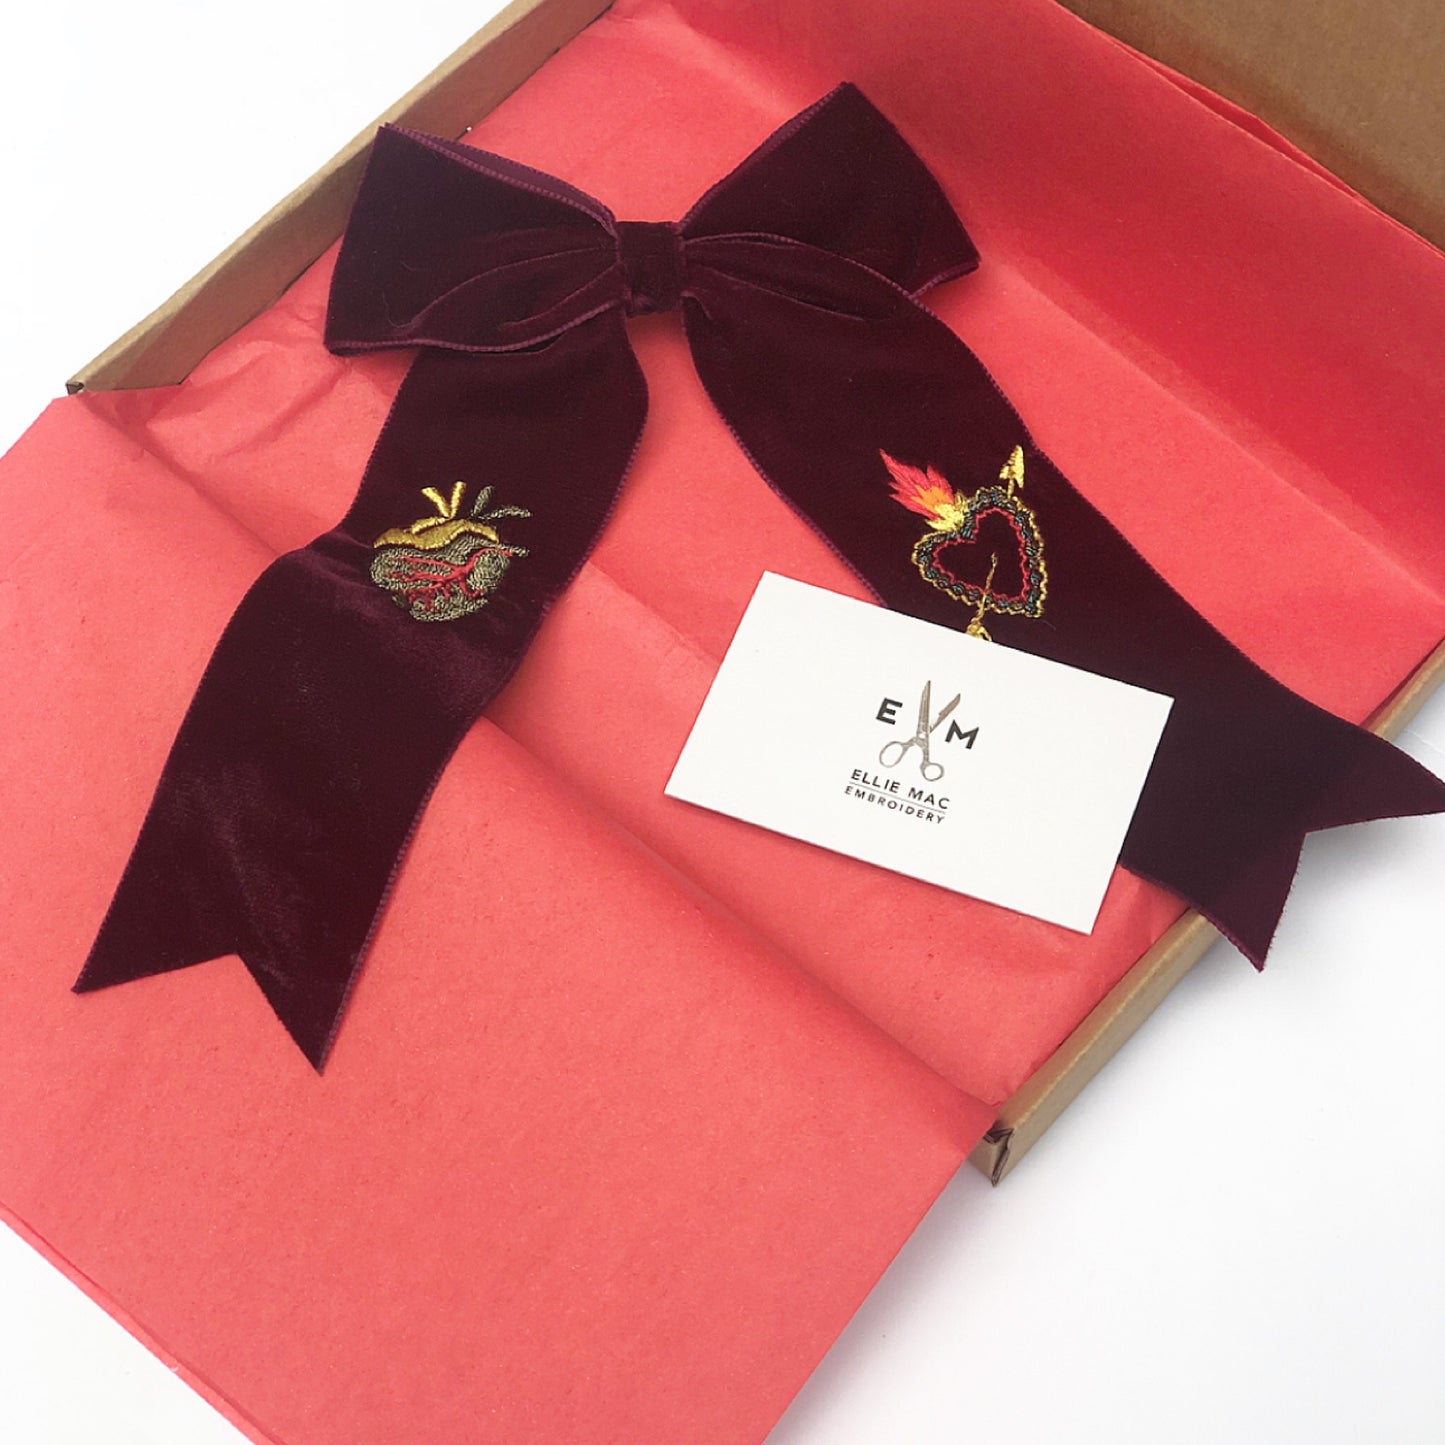 Maroon velvet hair bow in a small open brown box with salmon pink tissue paper